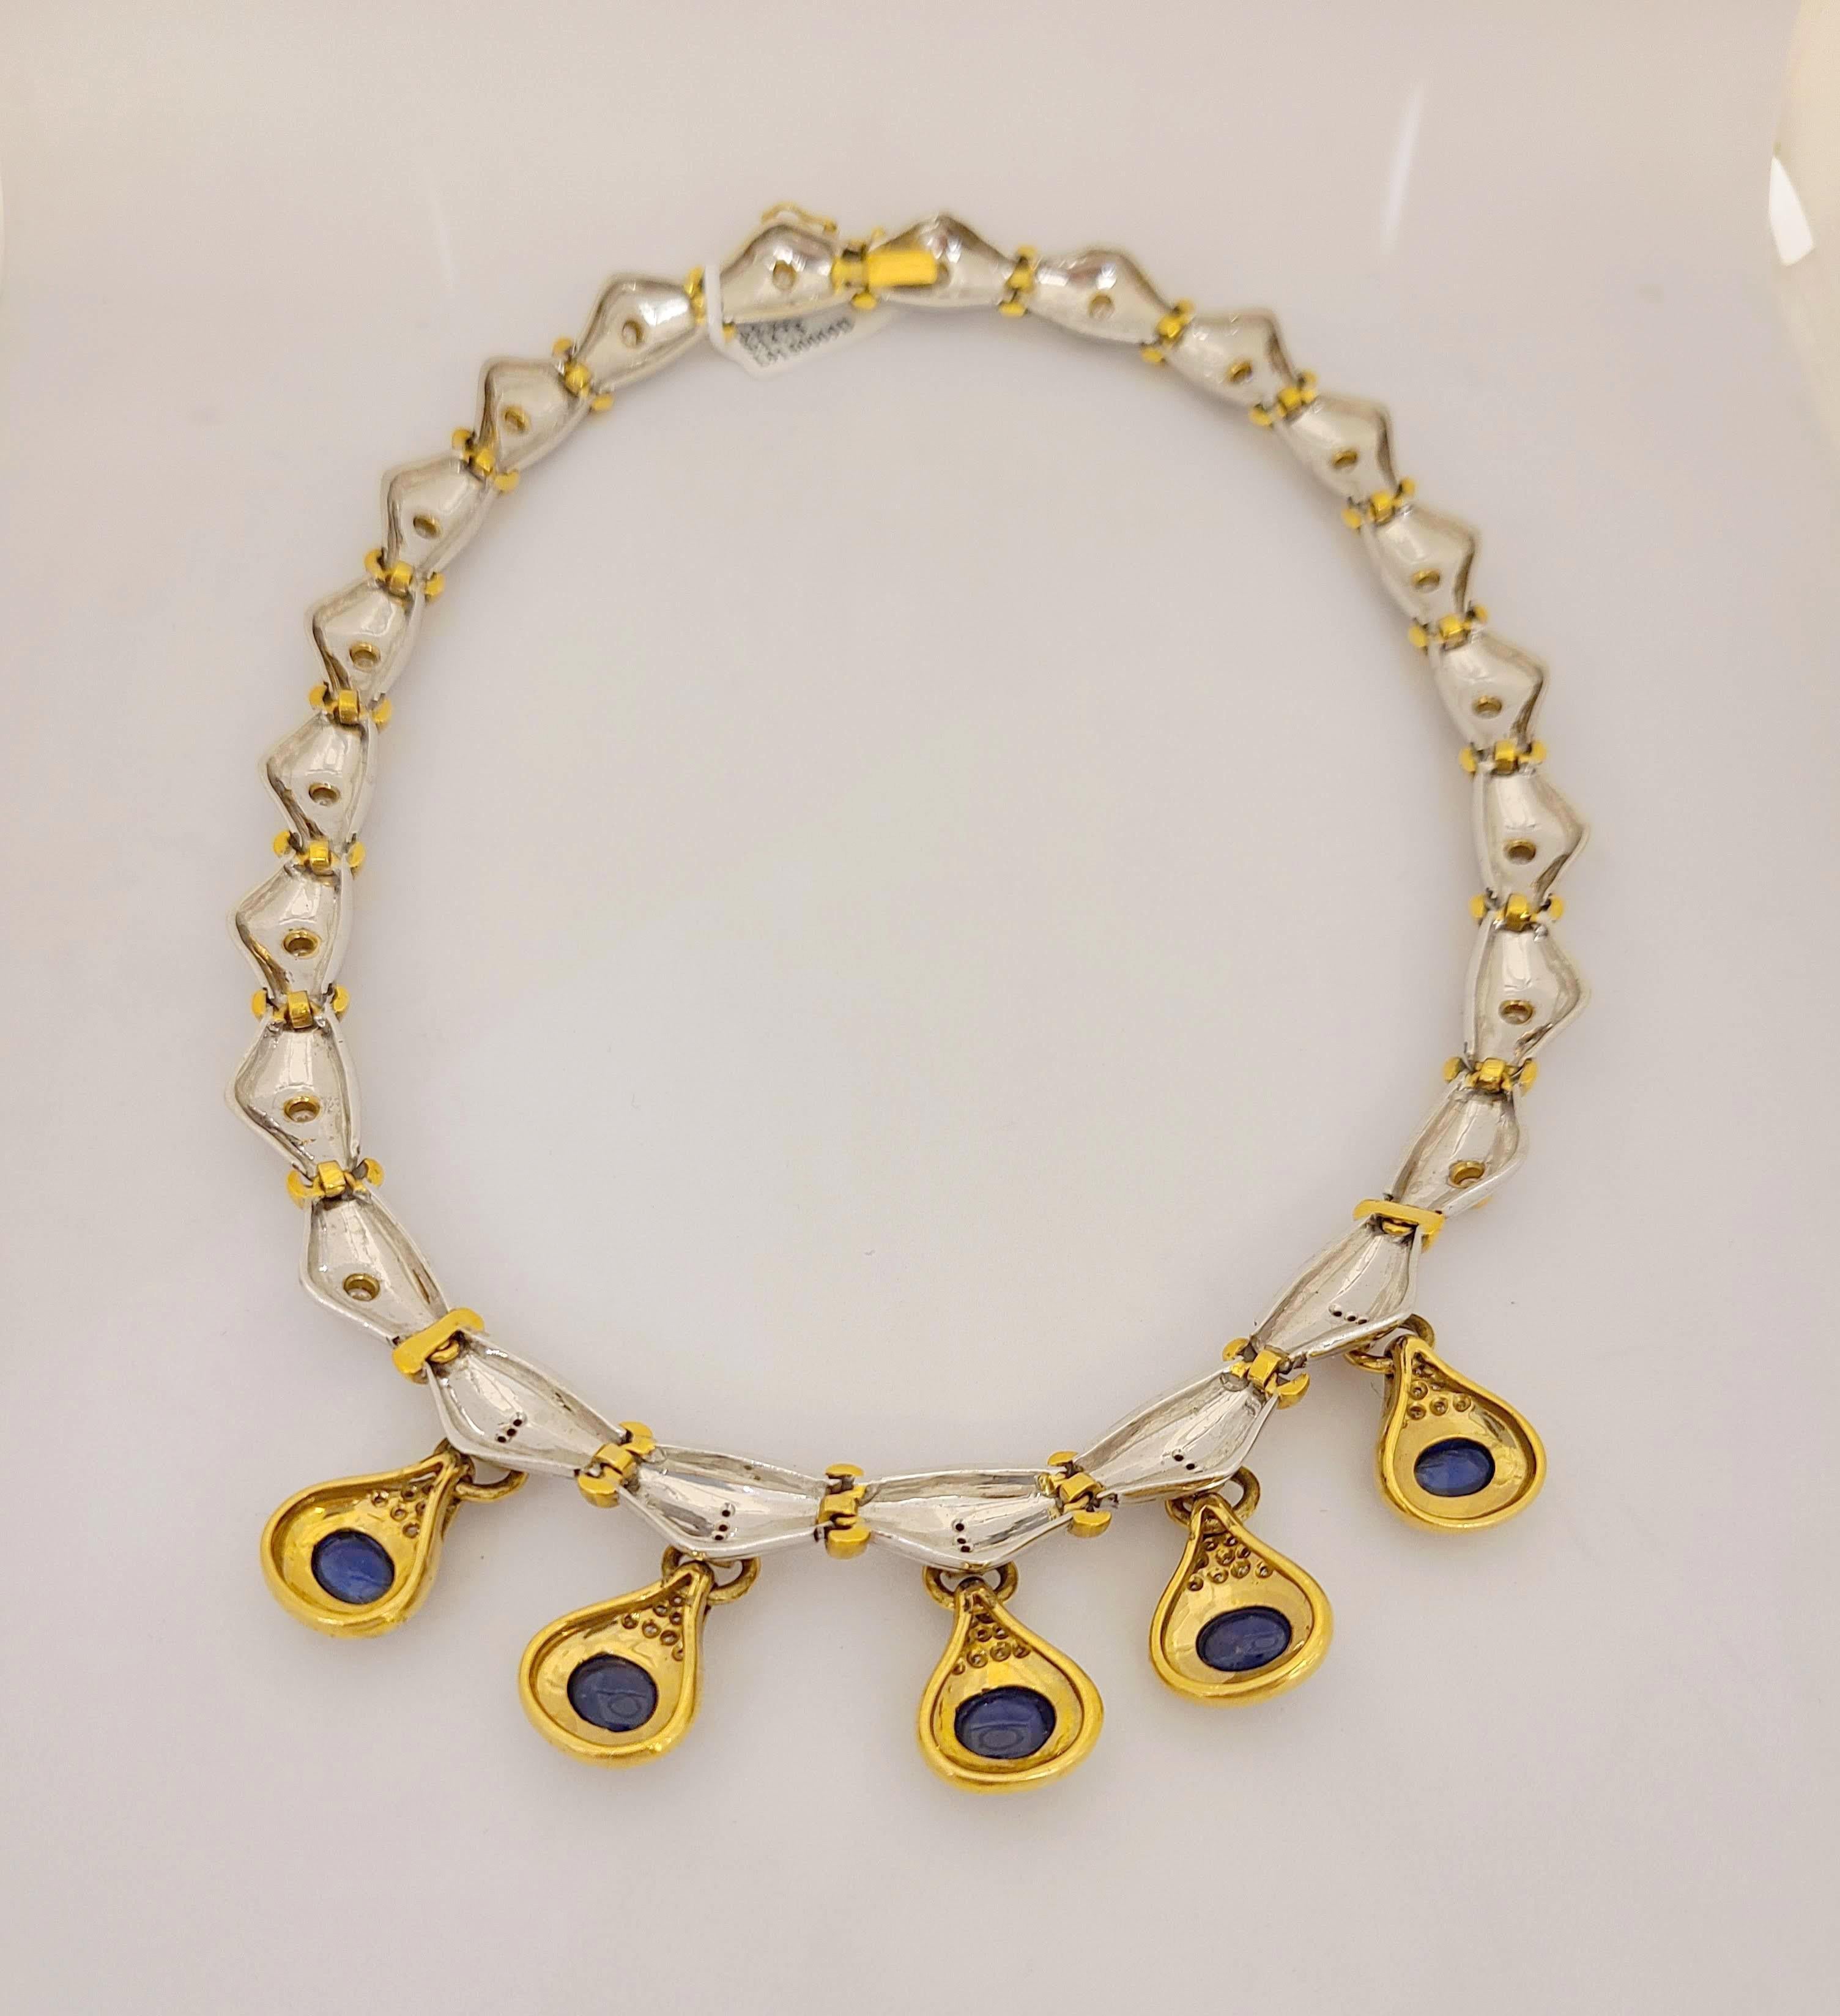 This lovely necklace is designed with 5 oval Blue Sapphire Cabochons, each set in an 18 kt yellow gold setting accented with round Brilliant Diamonds. The Sapphires hang from a necklace designed with fluted sections of white gold each centering a